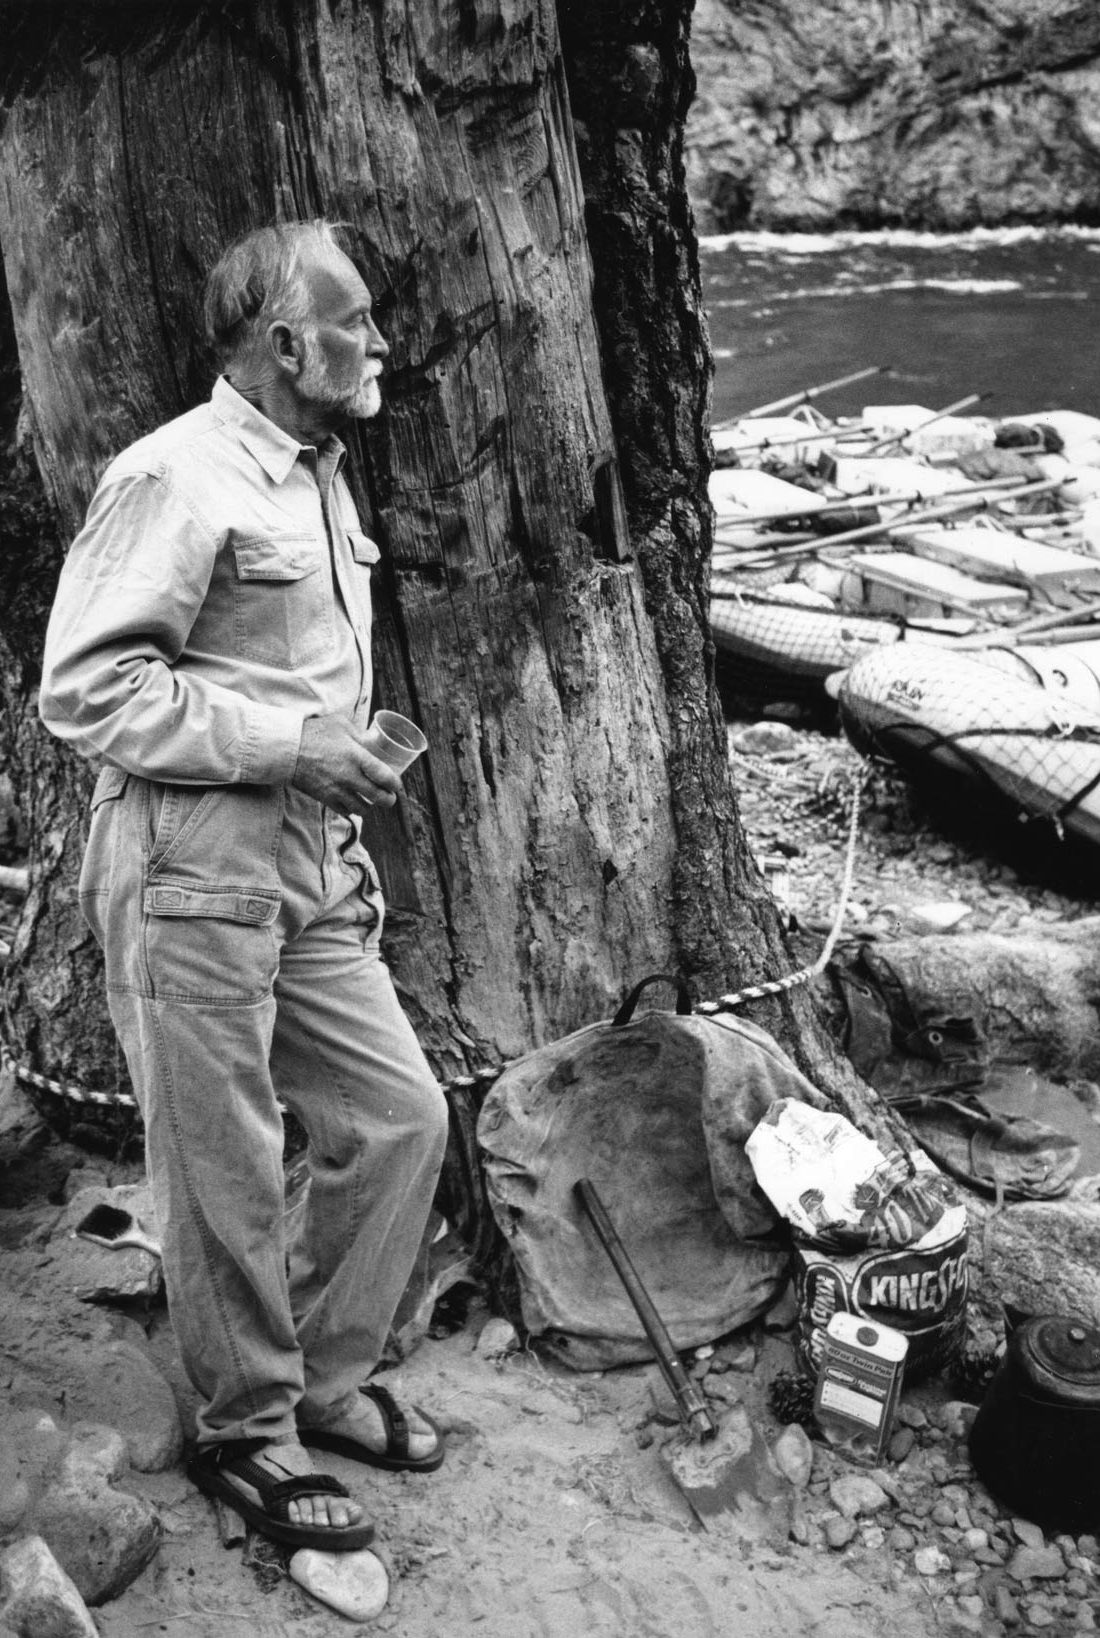 Robbins at the Middle Fork of the Salmon River in Idaho. He guided Royal Robbins employees on the classic, seven-day, self-supported kayak trip on an annual company retreat. [Photo] Robbins family collection